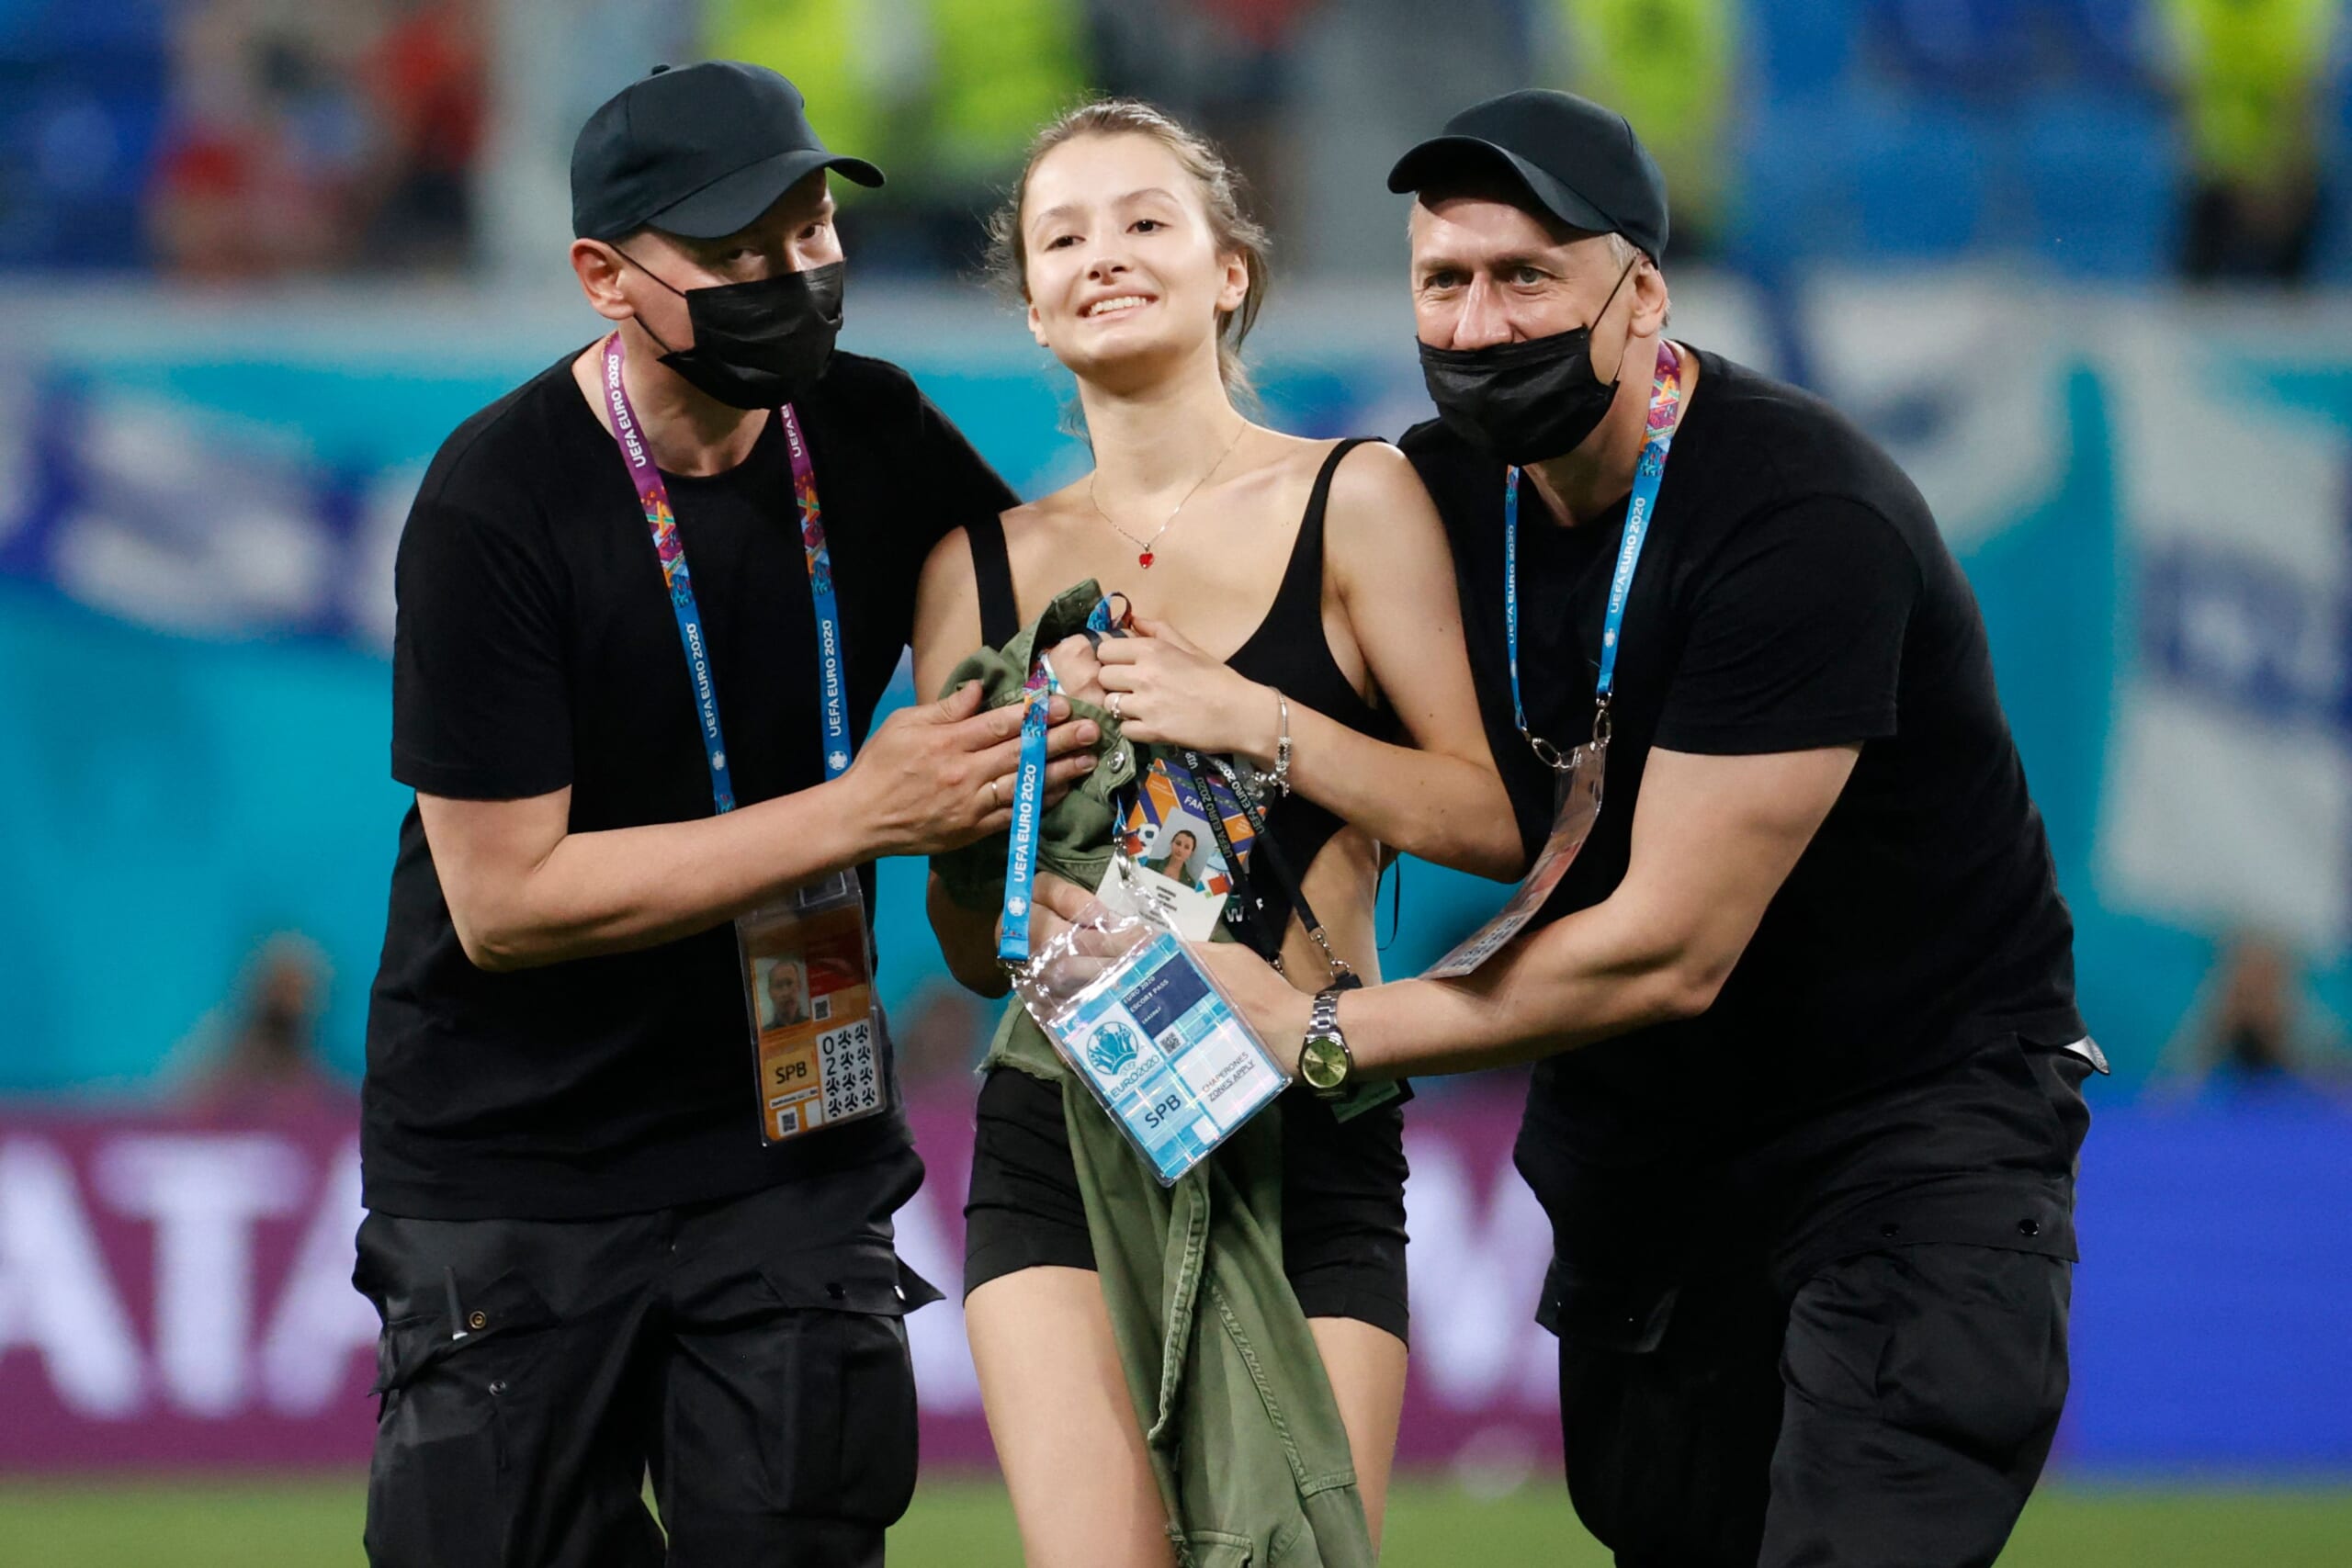 Stadium security stop a pitch invader during the UEFA EURO 2020 Group B football match between Finland and Belgium at Saint Petersburg Stadium in Saint Petersburg, Russia